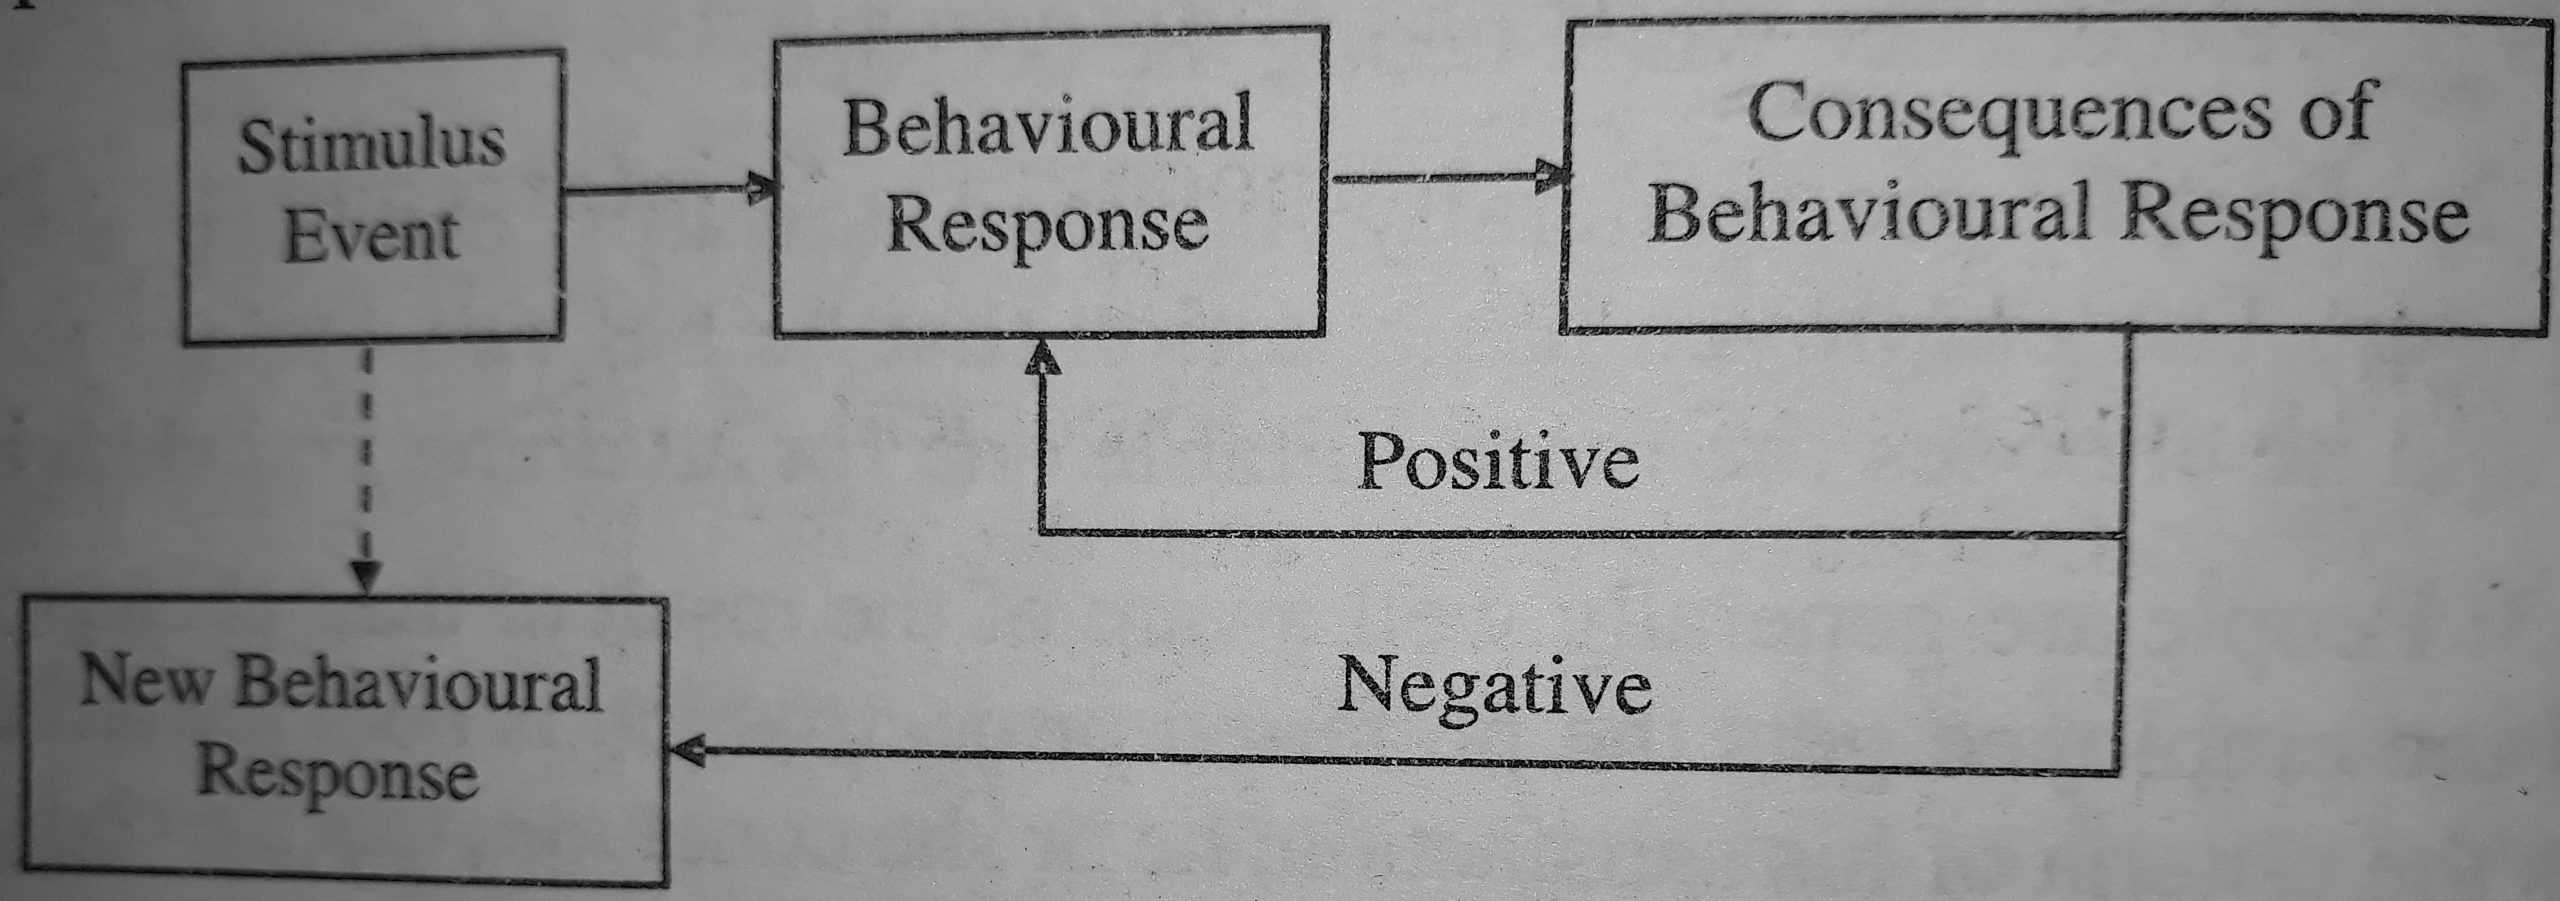 Effect of Behavioural Consequences on Learning